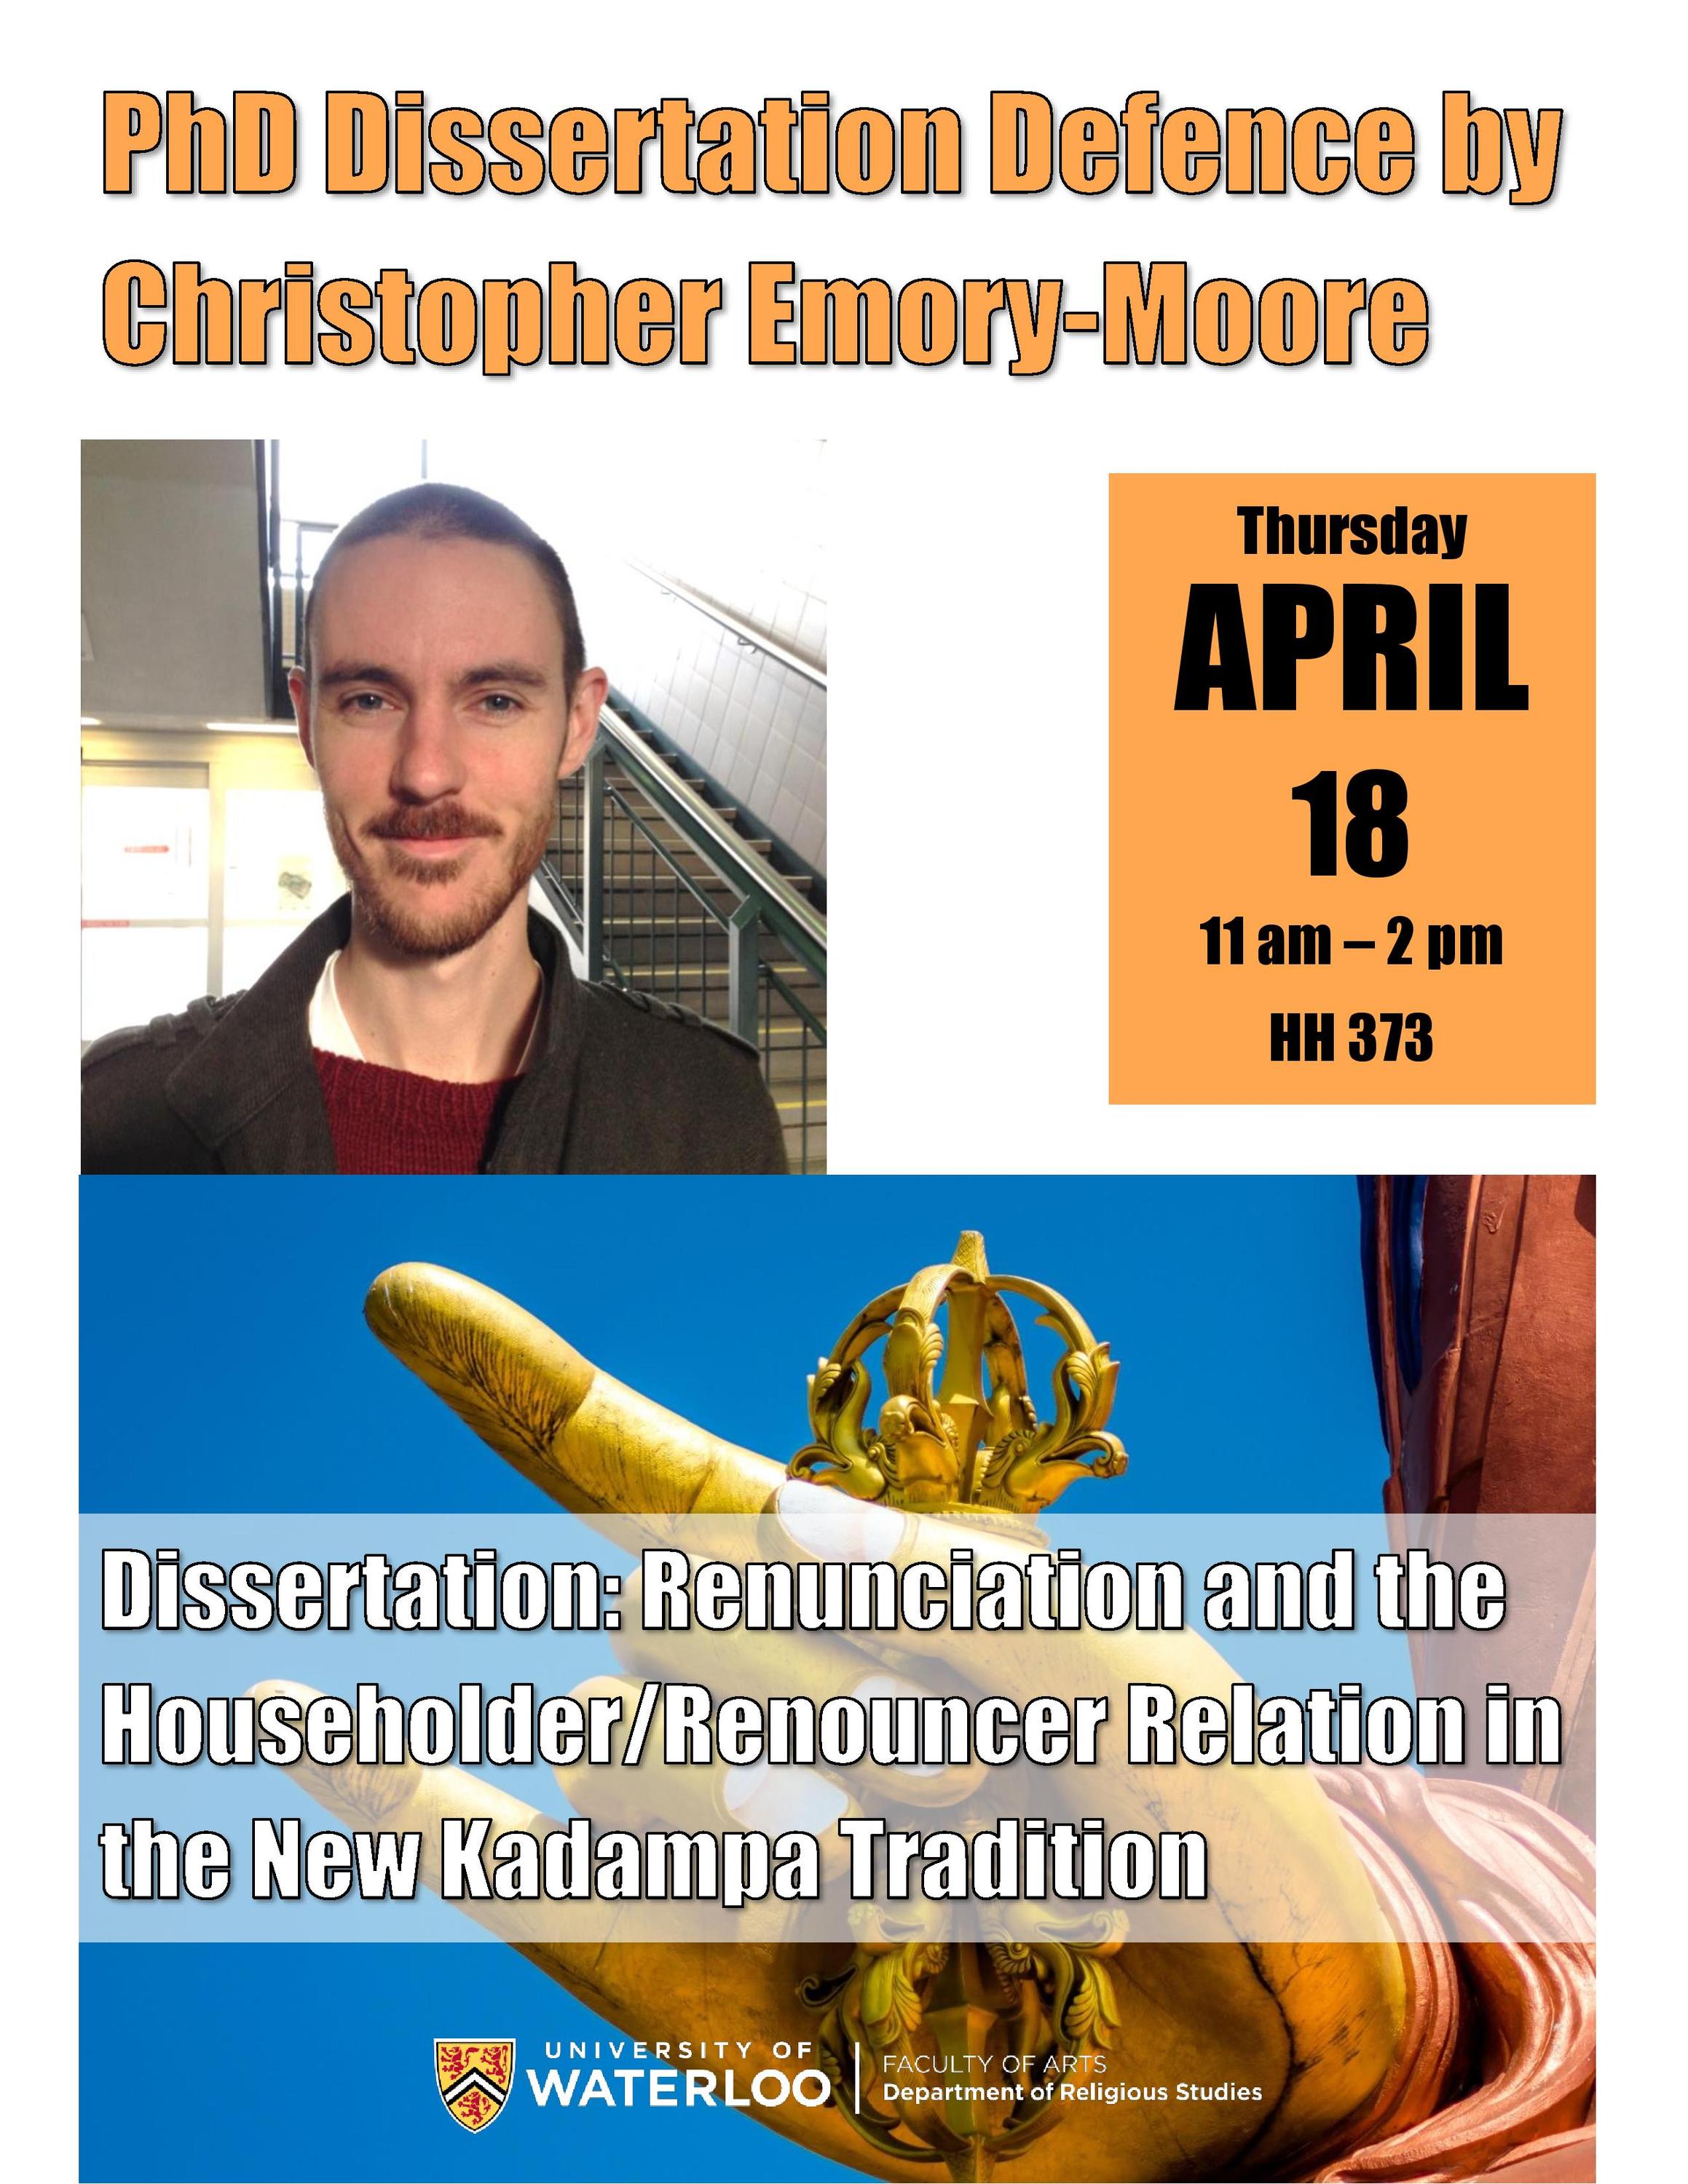 Event poster for Christopher Emory-Moore's PhD defence.